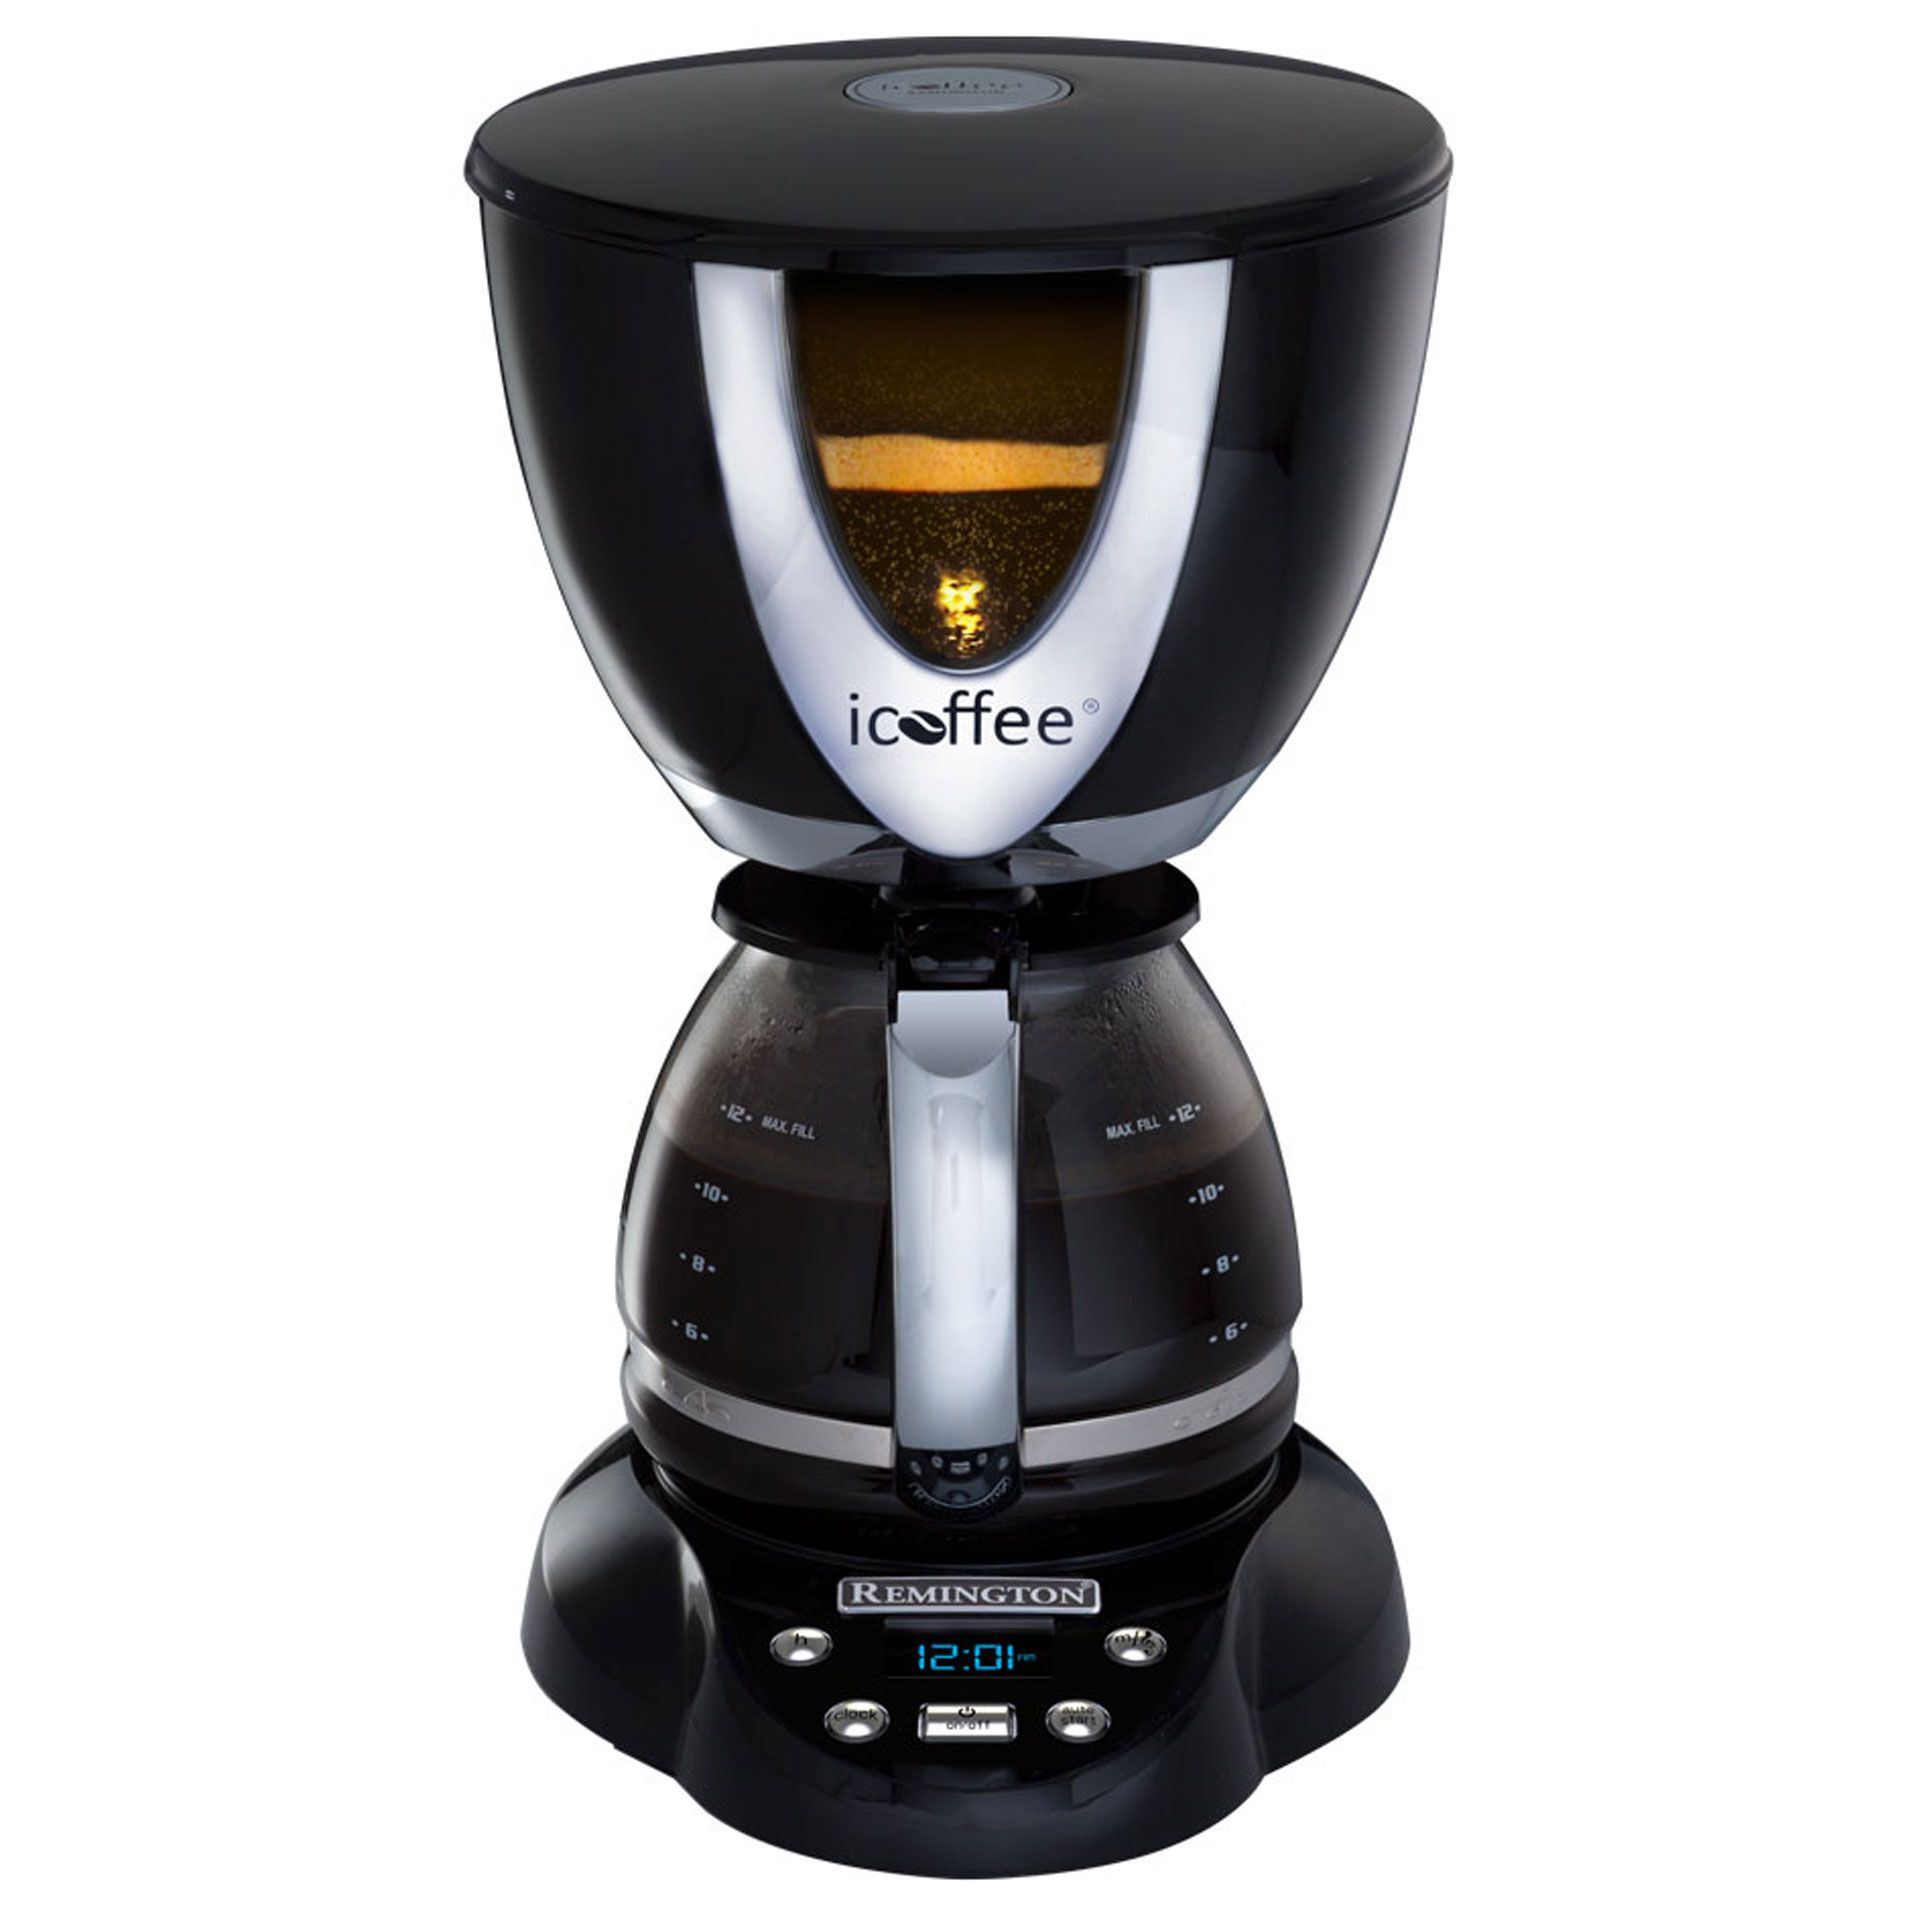 Icoffee Maker Not Brewing - Icoffee Davinci Single Serve Rss300 K Cup Coffee Brewer With Spin Brew Walmart Com Walmart Com - Coffee makes us refreshed every morning and keeps us productive throughout the day.